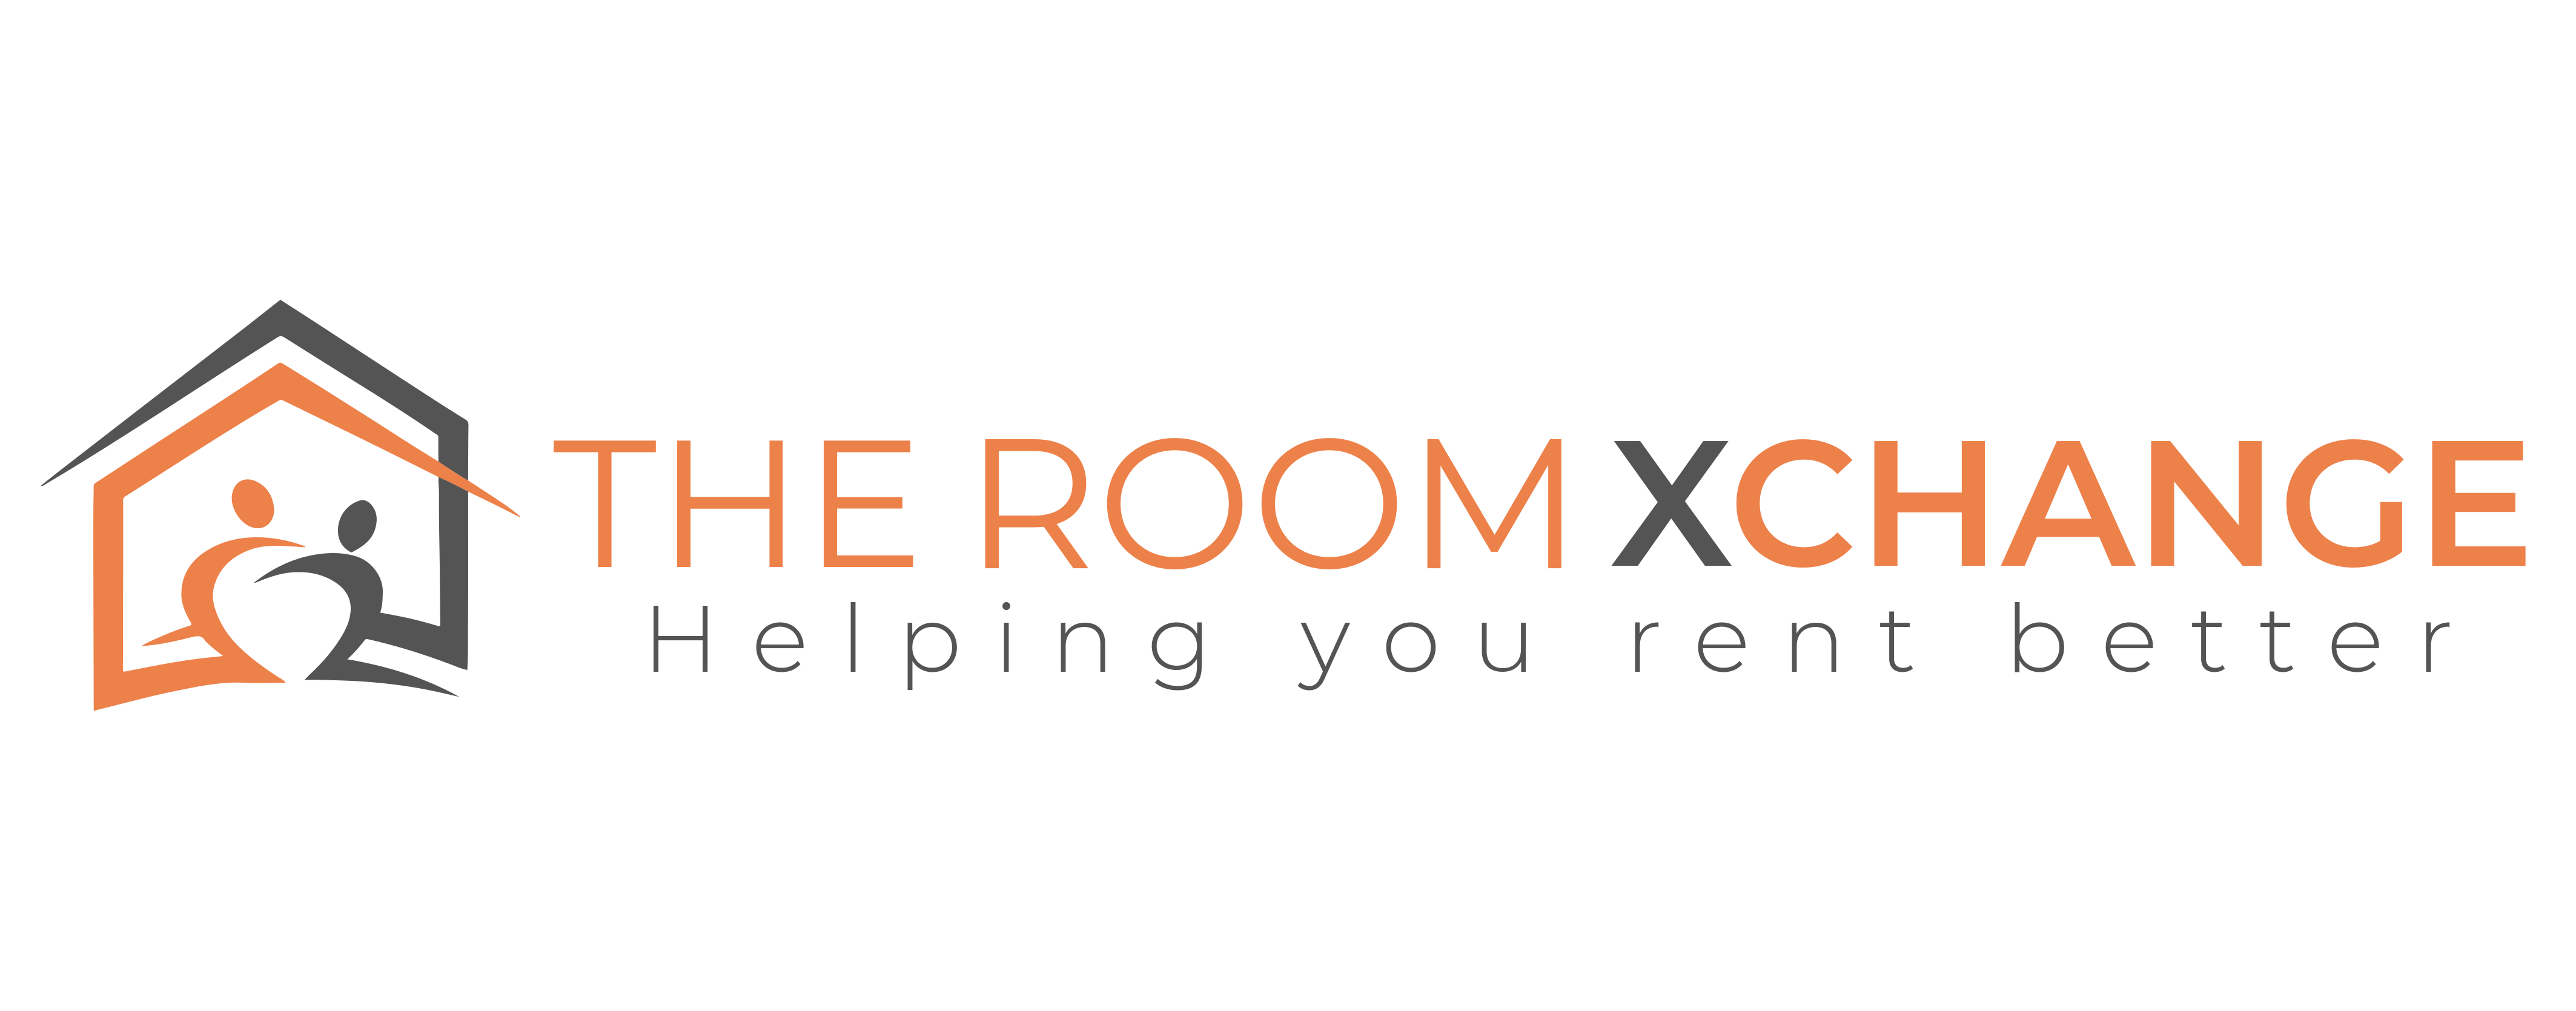 The Room Xchange, Sunday, March 13, 2022, Press release picture